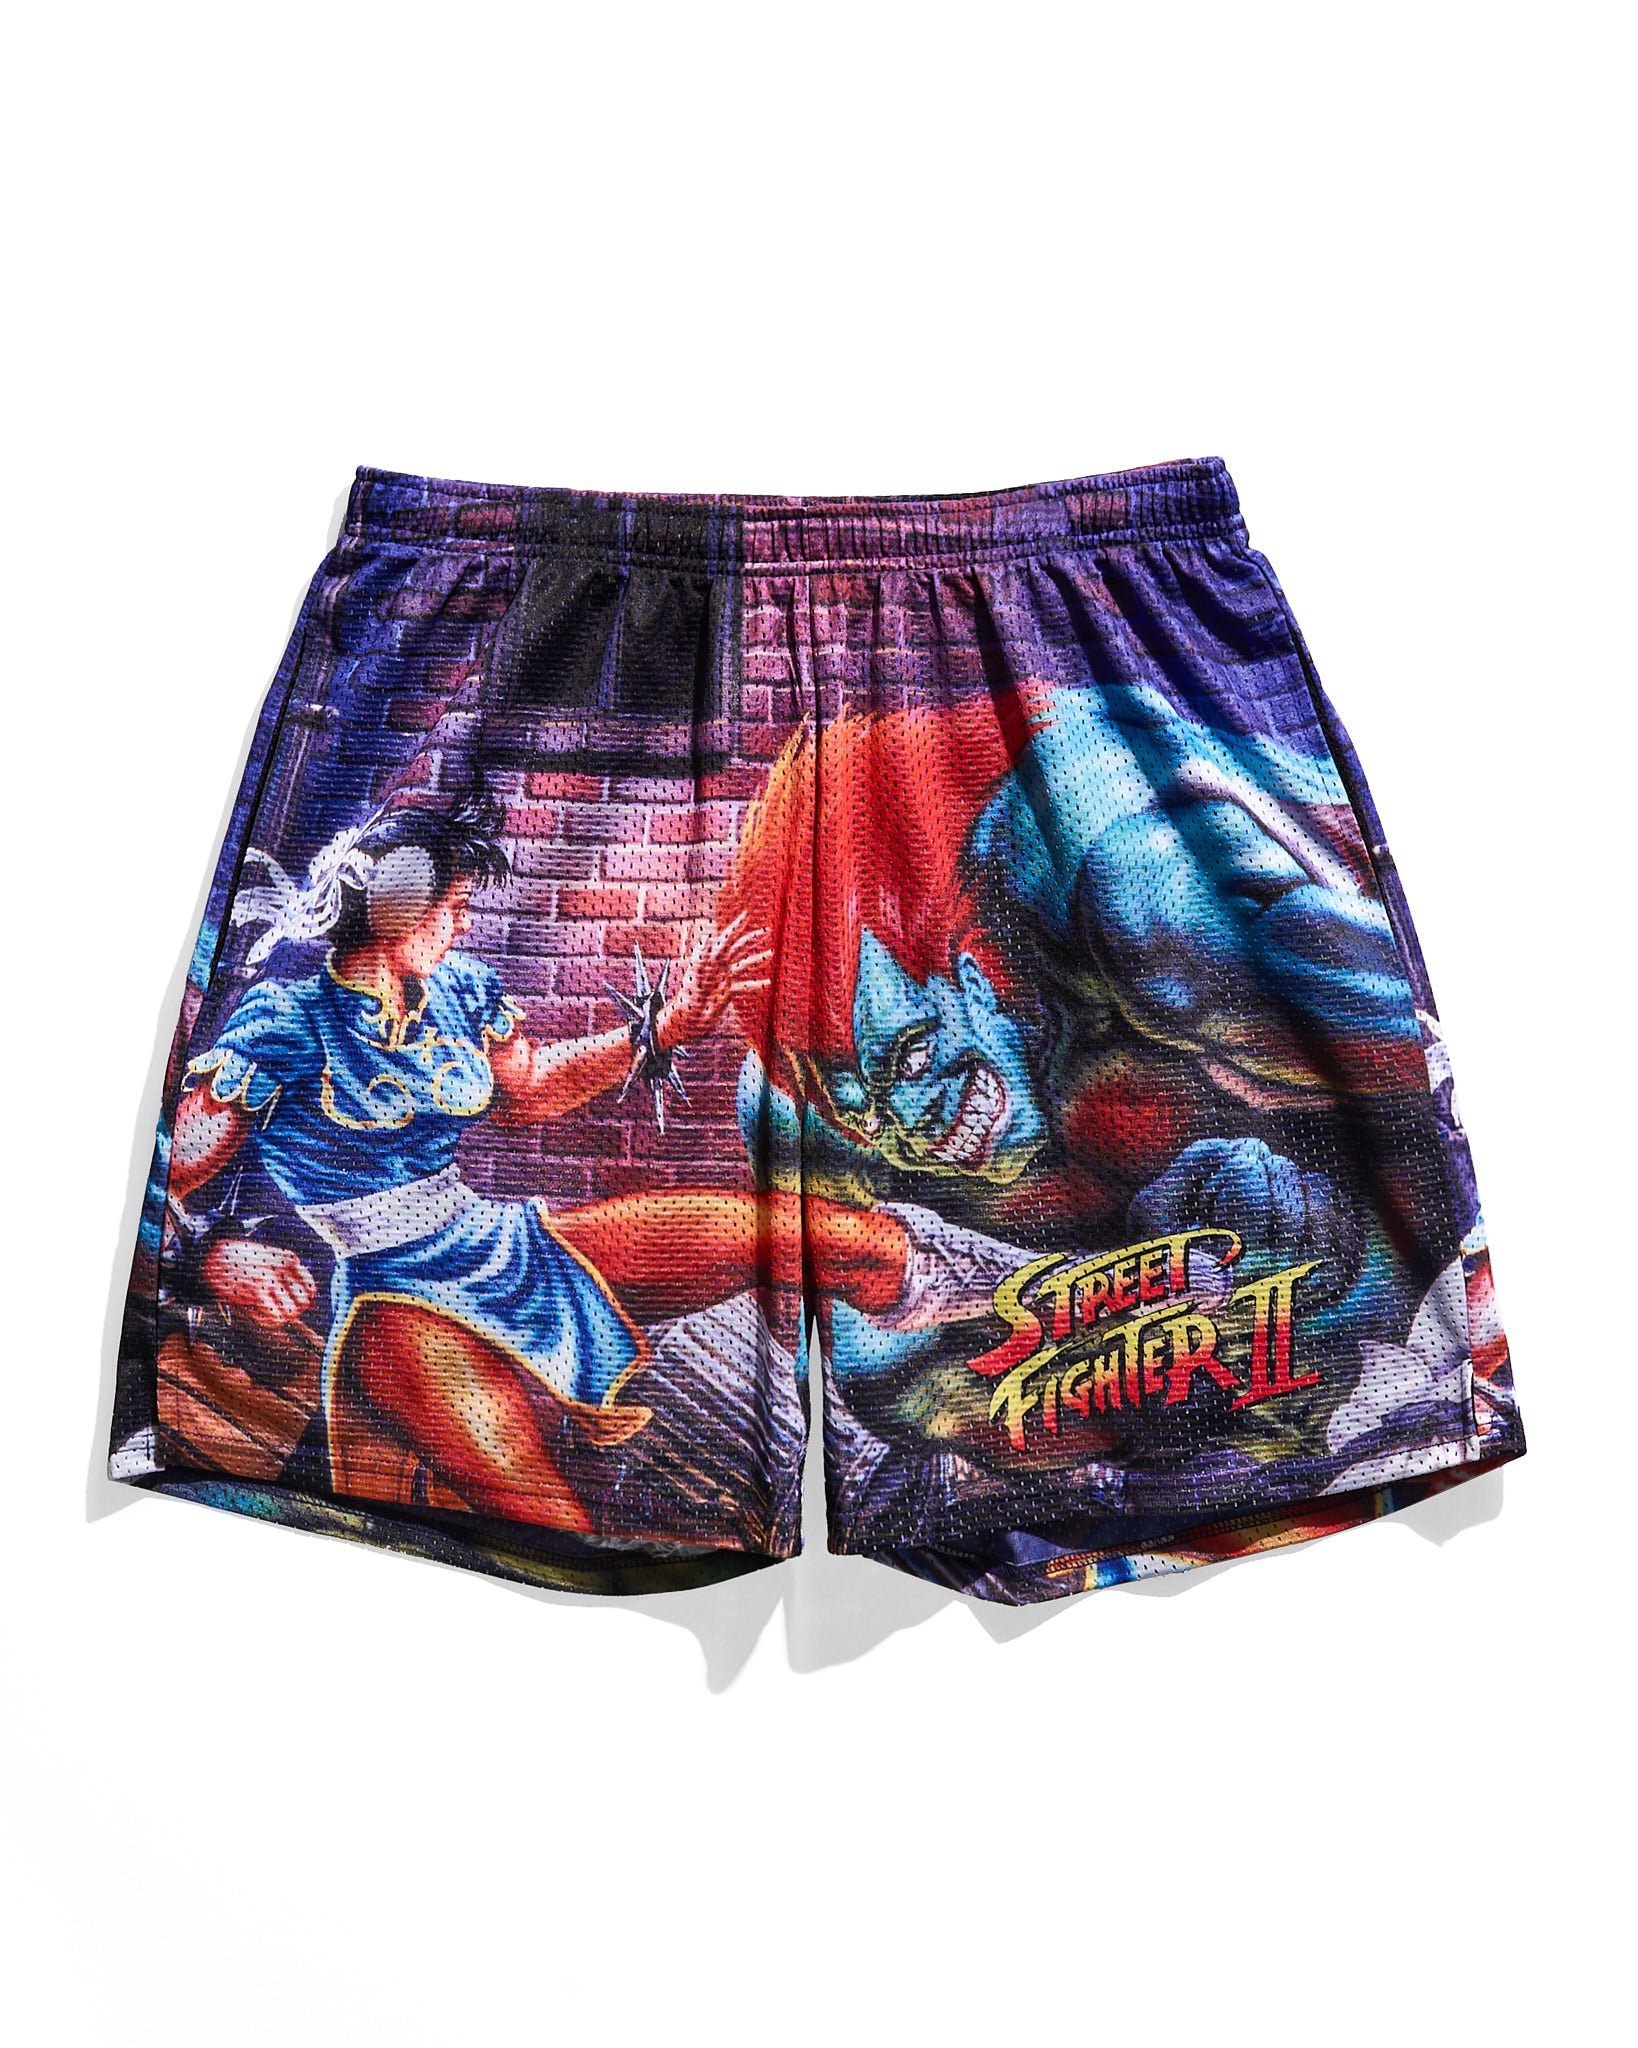 Street Fighter 2 Cover Retro Shorts